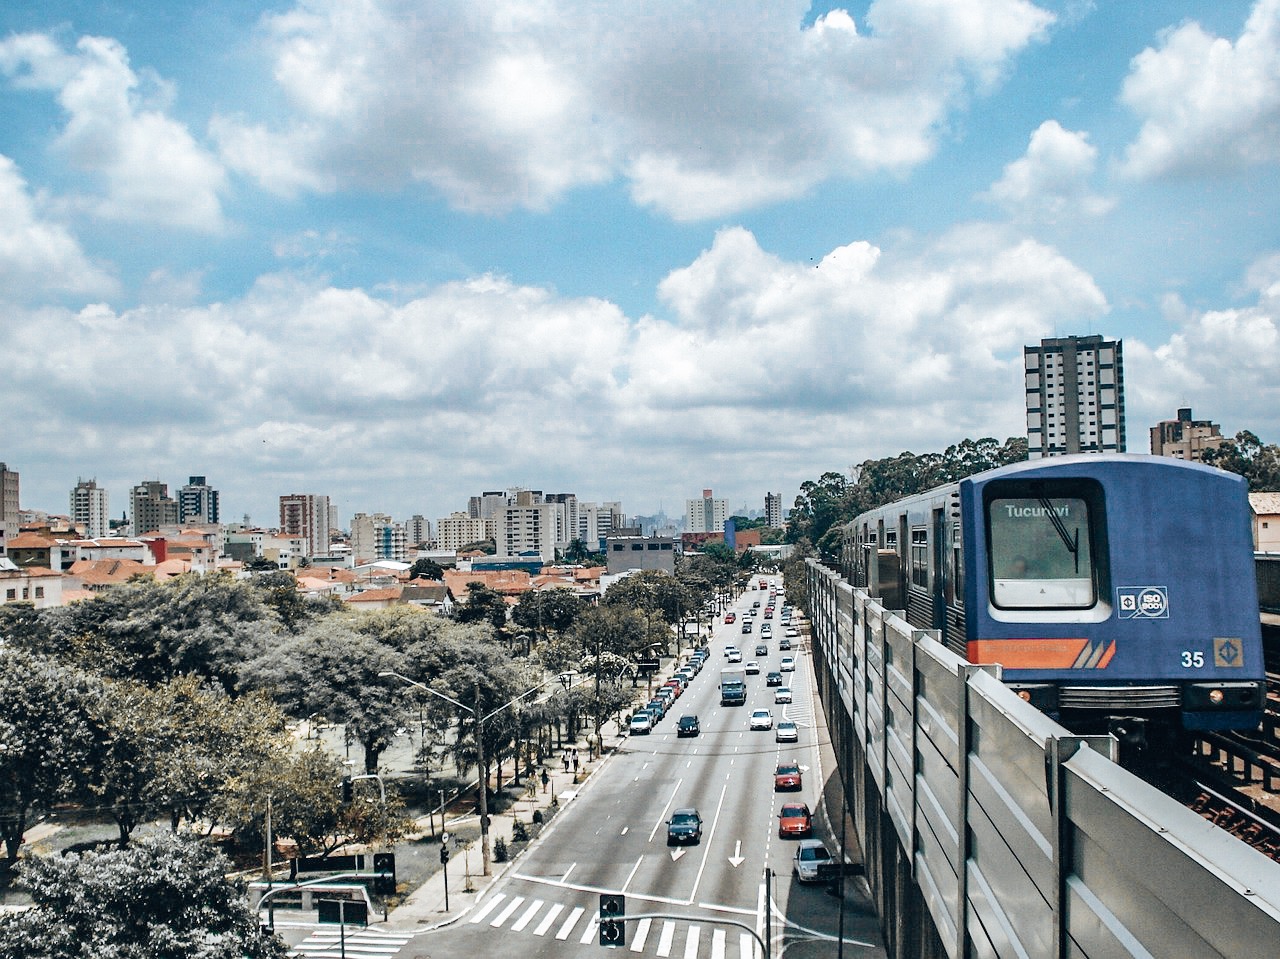 Rio Carnival Subway - Image of train entering platform above a busy highway road